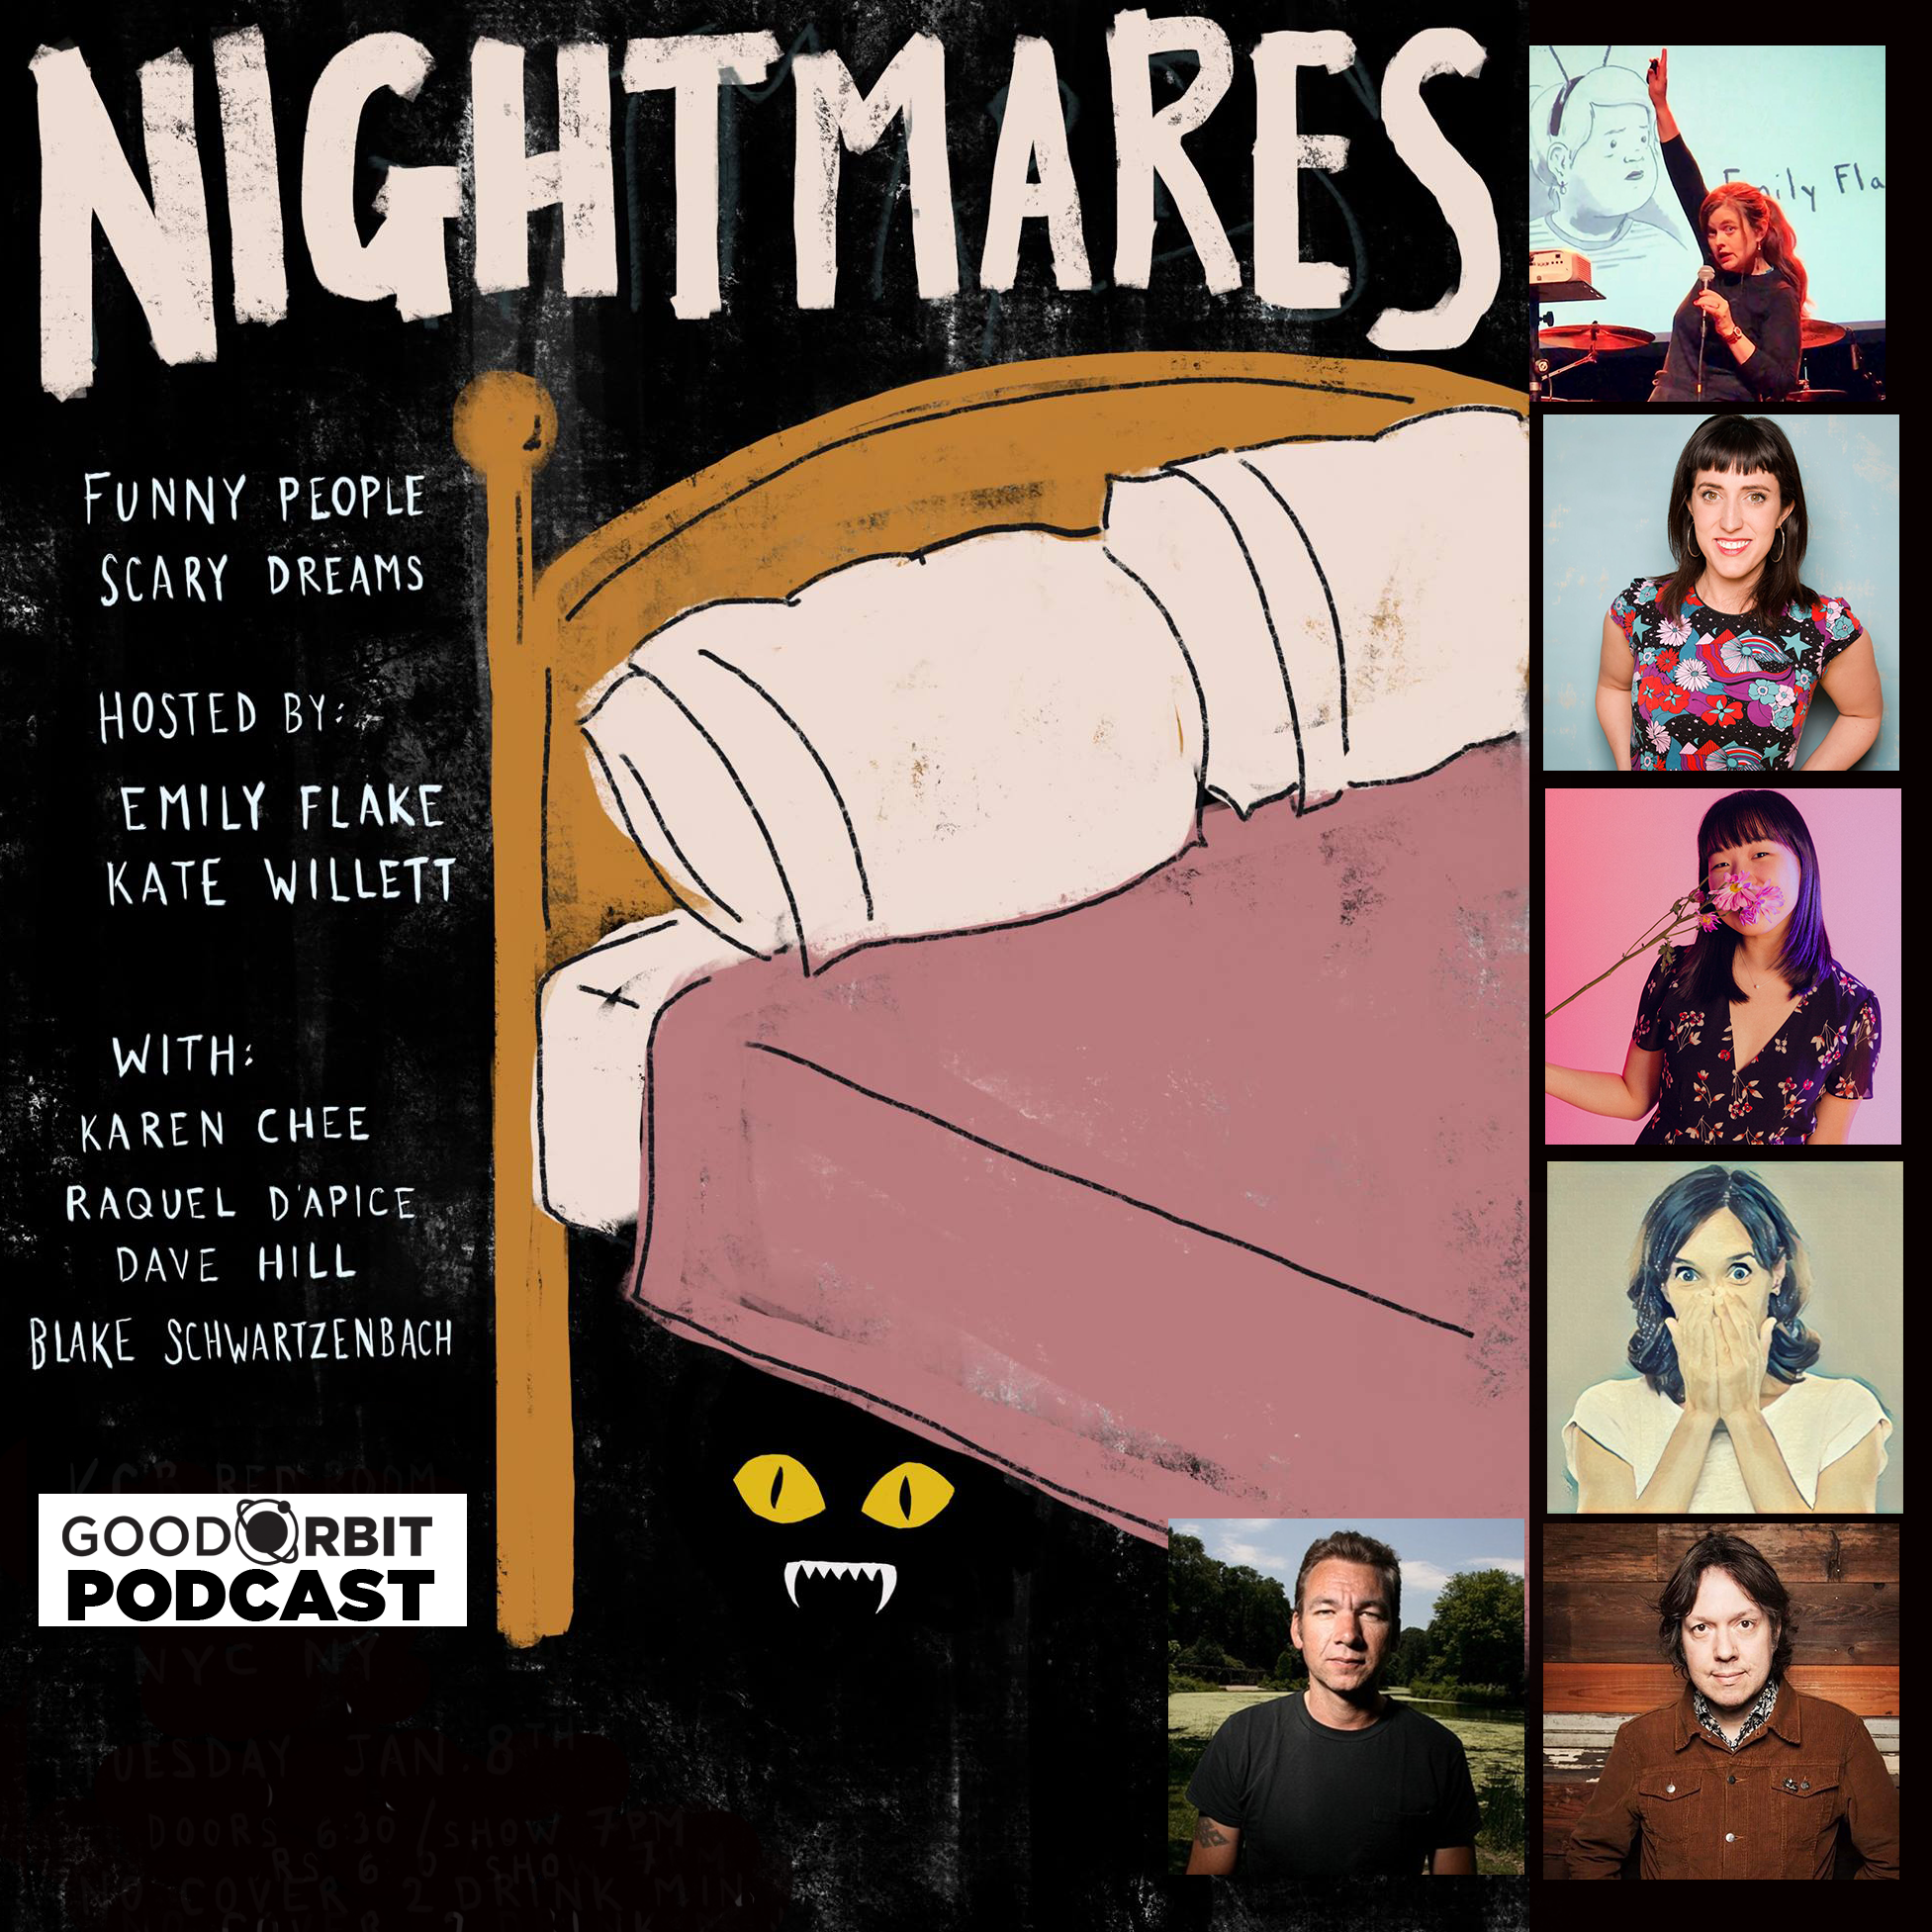 Nightmares: Funny People, Scary Dreams Ep 2: Dave Hill, Raquel D’Apice, Karen Chee, Blake Schwartzenbach & hosts Emily Flake & Kate Willett